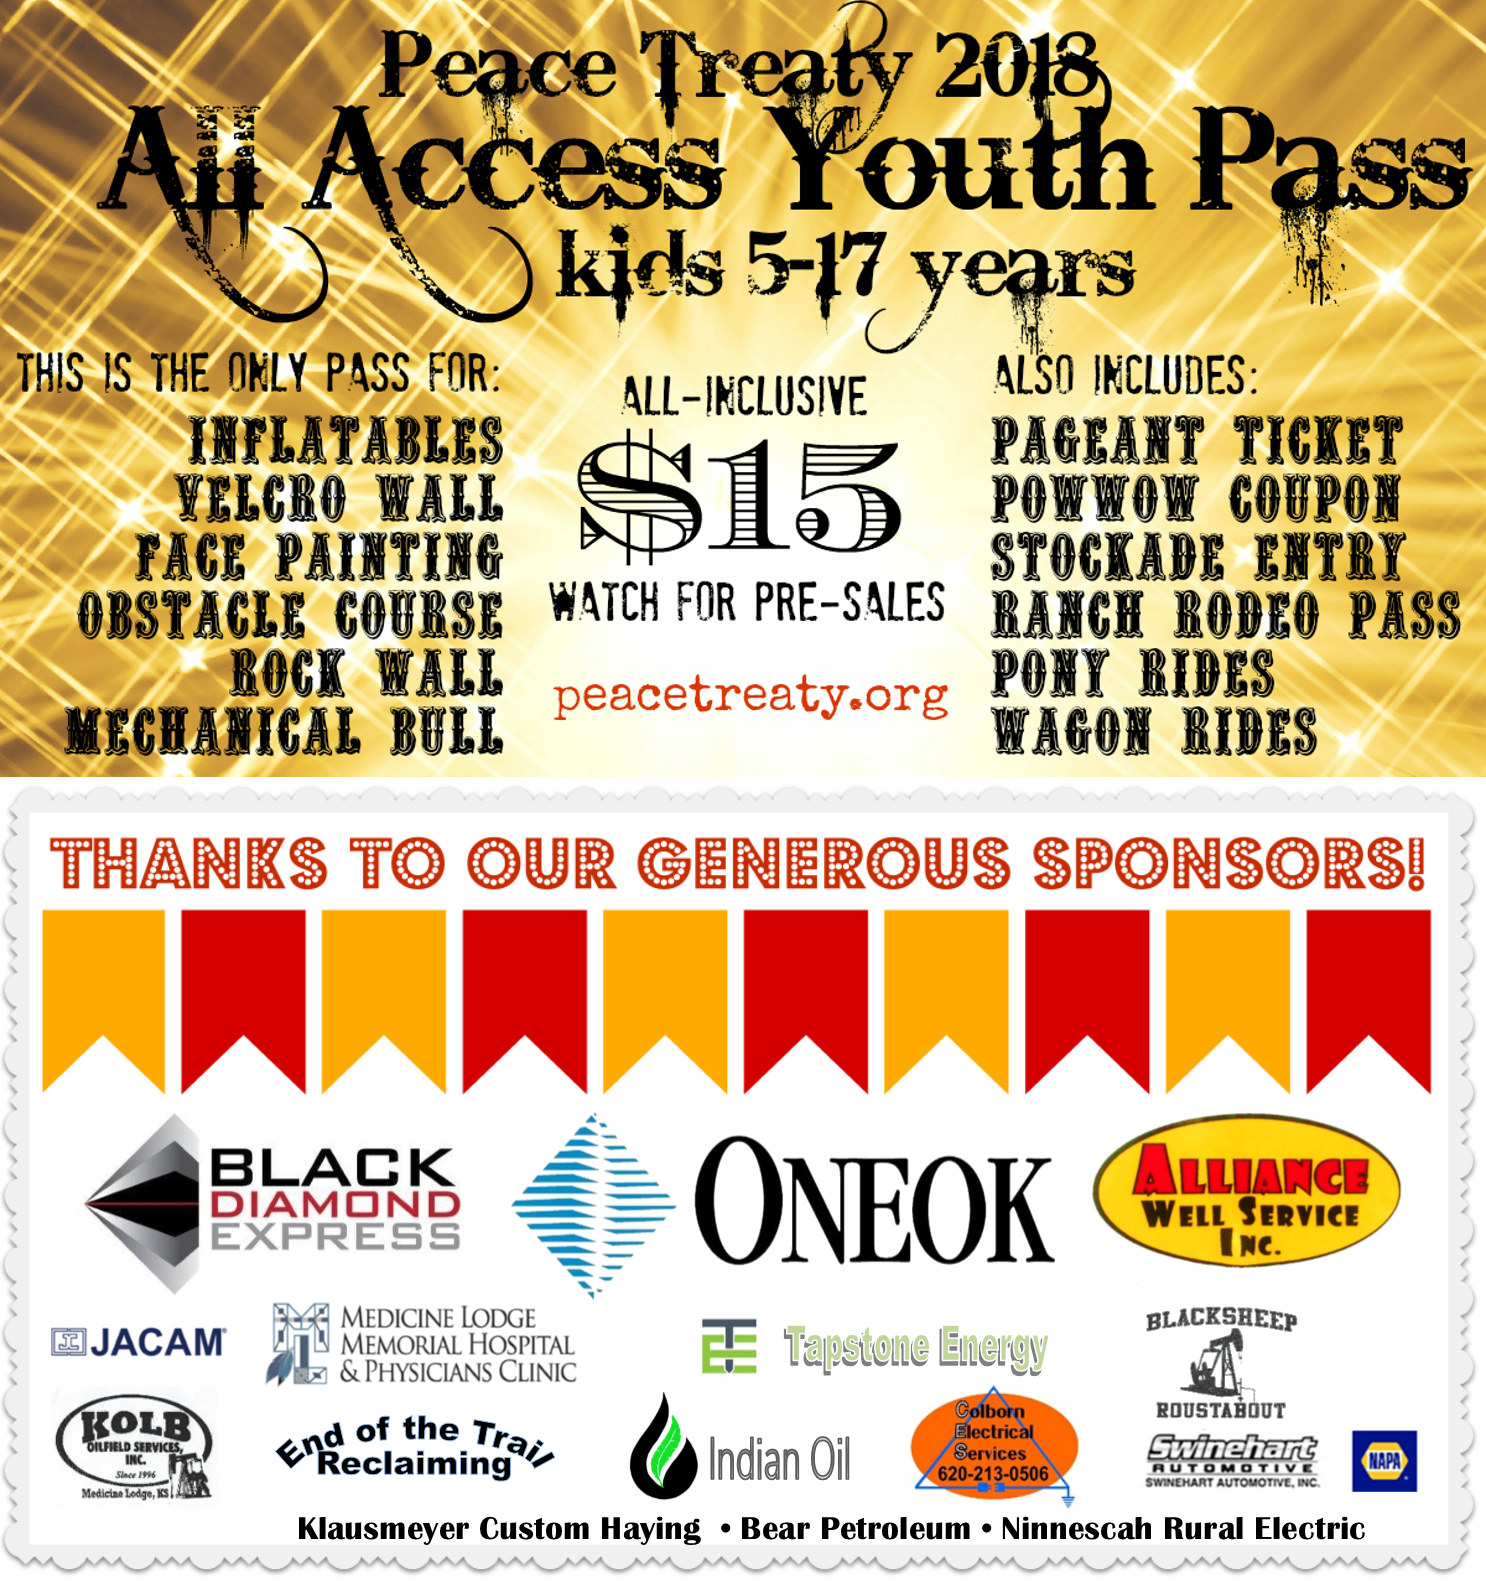 youthpass_flyer